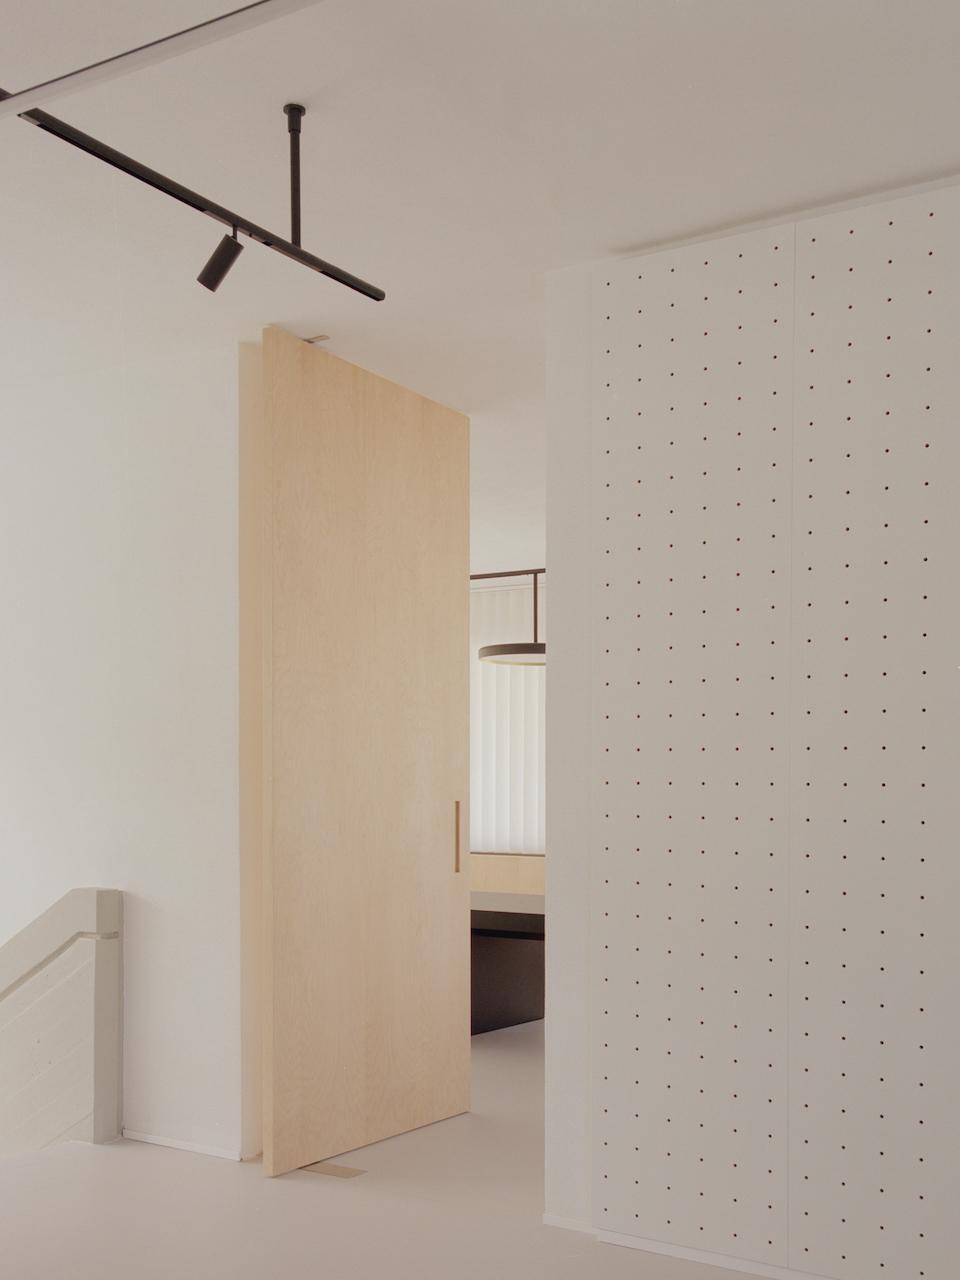 Quadrodesign’s Revamped Office in Italy is a Minimalist Haven